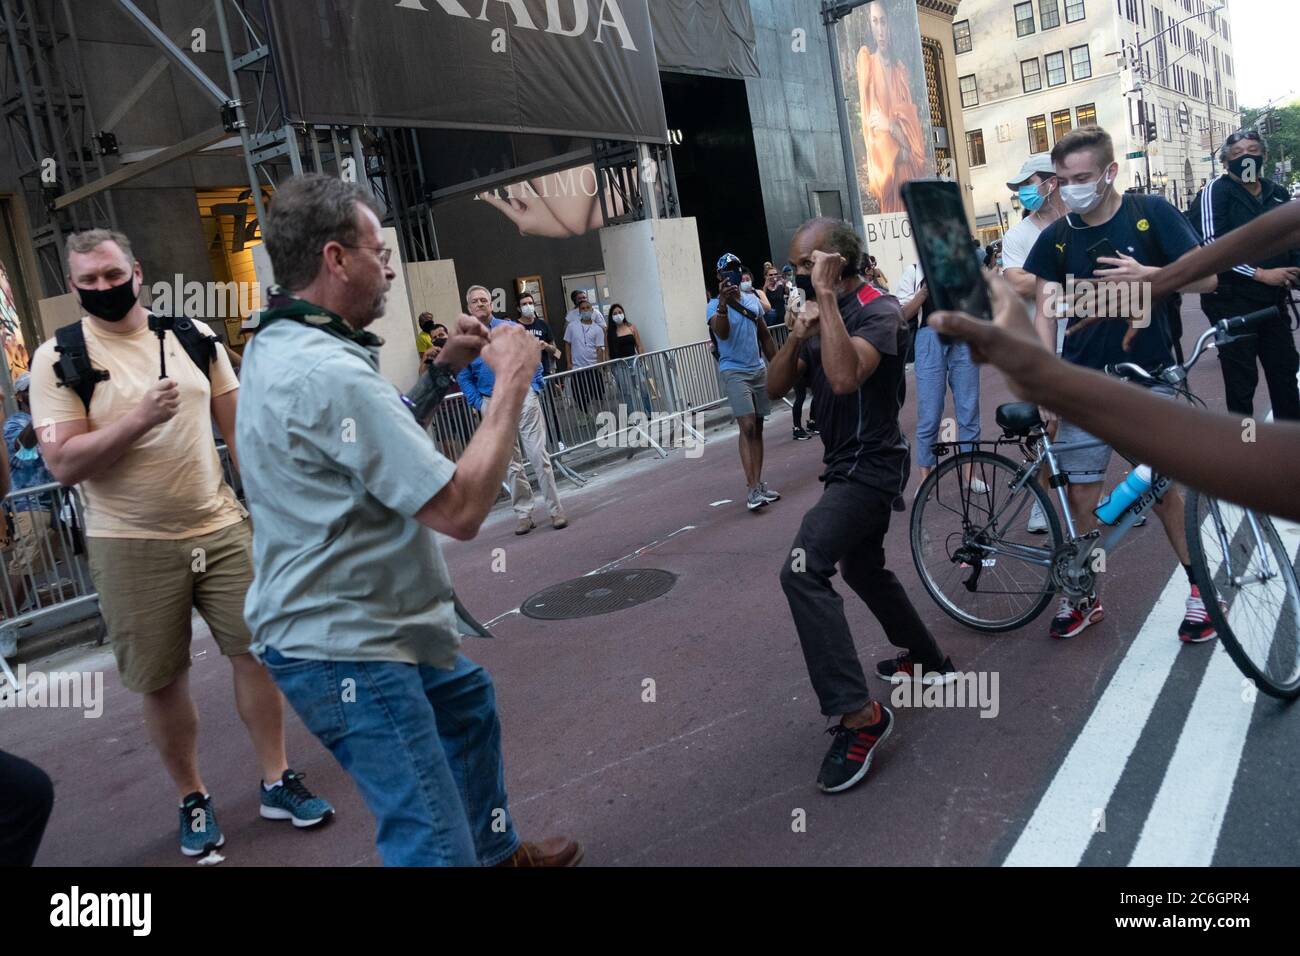 New York, United States. 08th July, 2020. A physical altercation between a Trump supporter and a BLM protester in front of Trump Tower in Manhattan where a large Black Lives Matter mural was painted.As New York City enters phase 3 of reopening retail stores for indoor shopping, restaurants have been postponed for indoor dinning. Meanwhile Black Lives Matter protests continue in the city as the Mayor along with a group of people painted a large Black Lives Matter mural in front of Trump Tower on 5th Ave. Credit: SOPA Images Limited/Alamy Live News Stock Photo